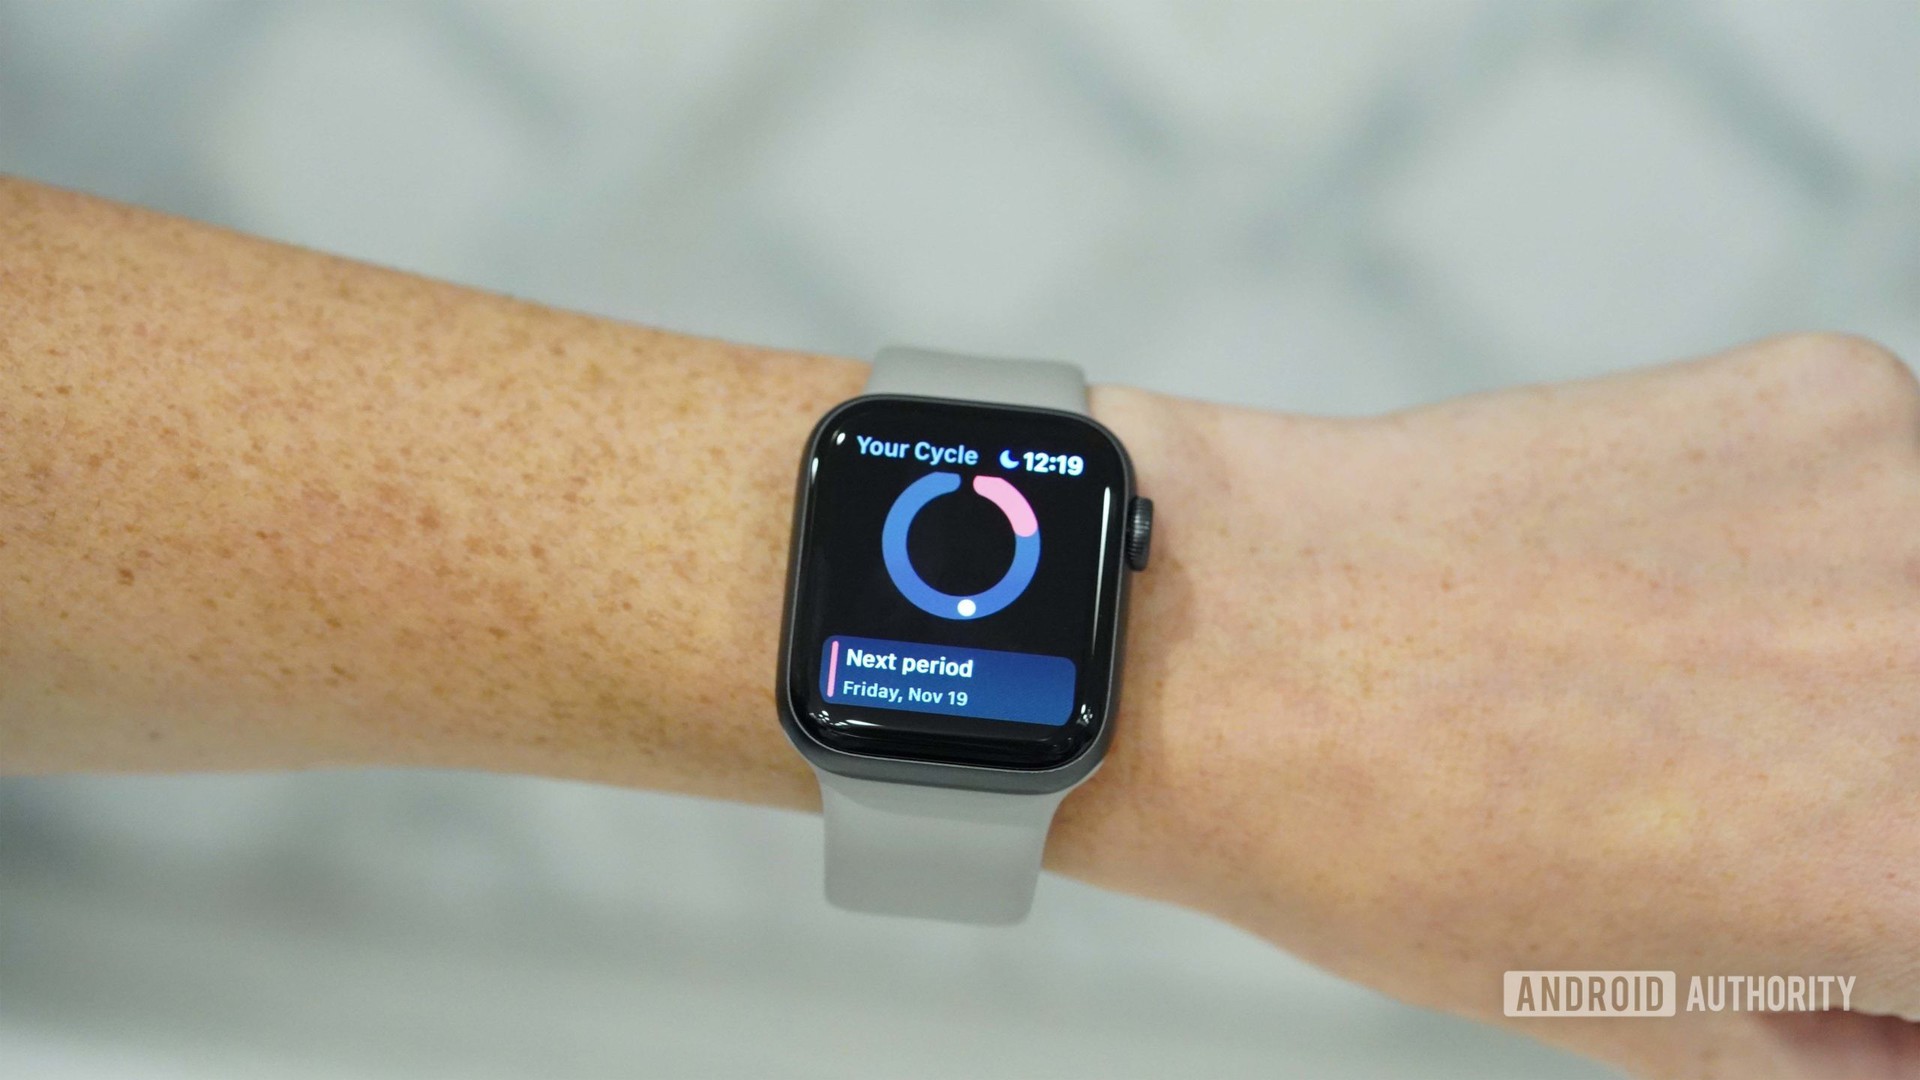 An Apple Watch Series 6 displays information about a users next period.